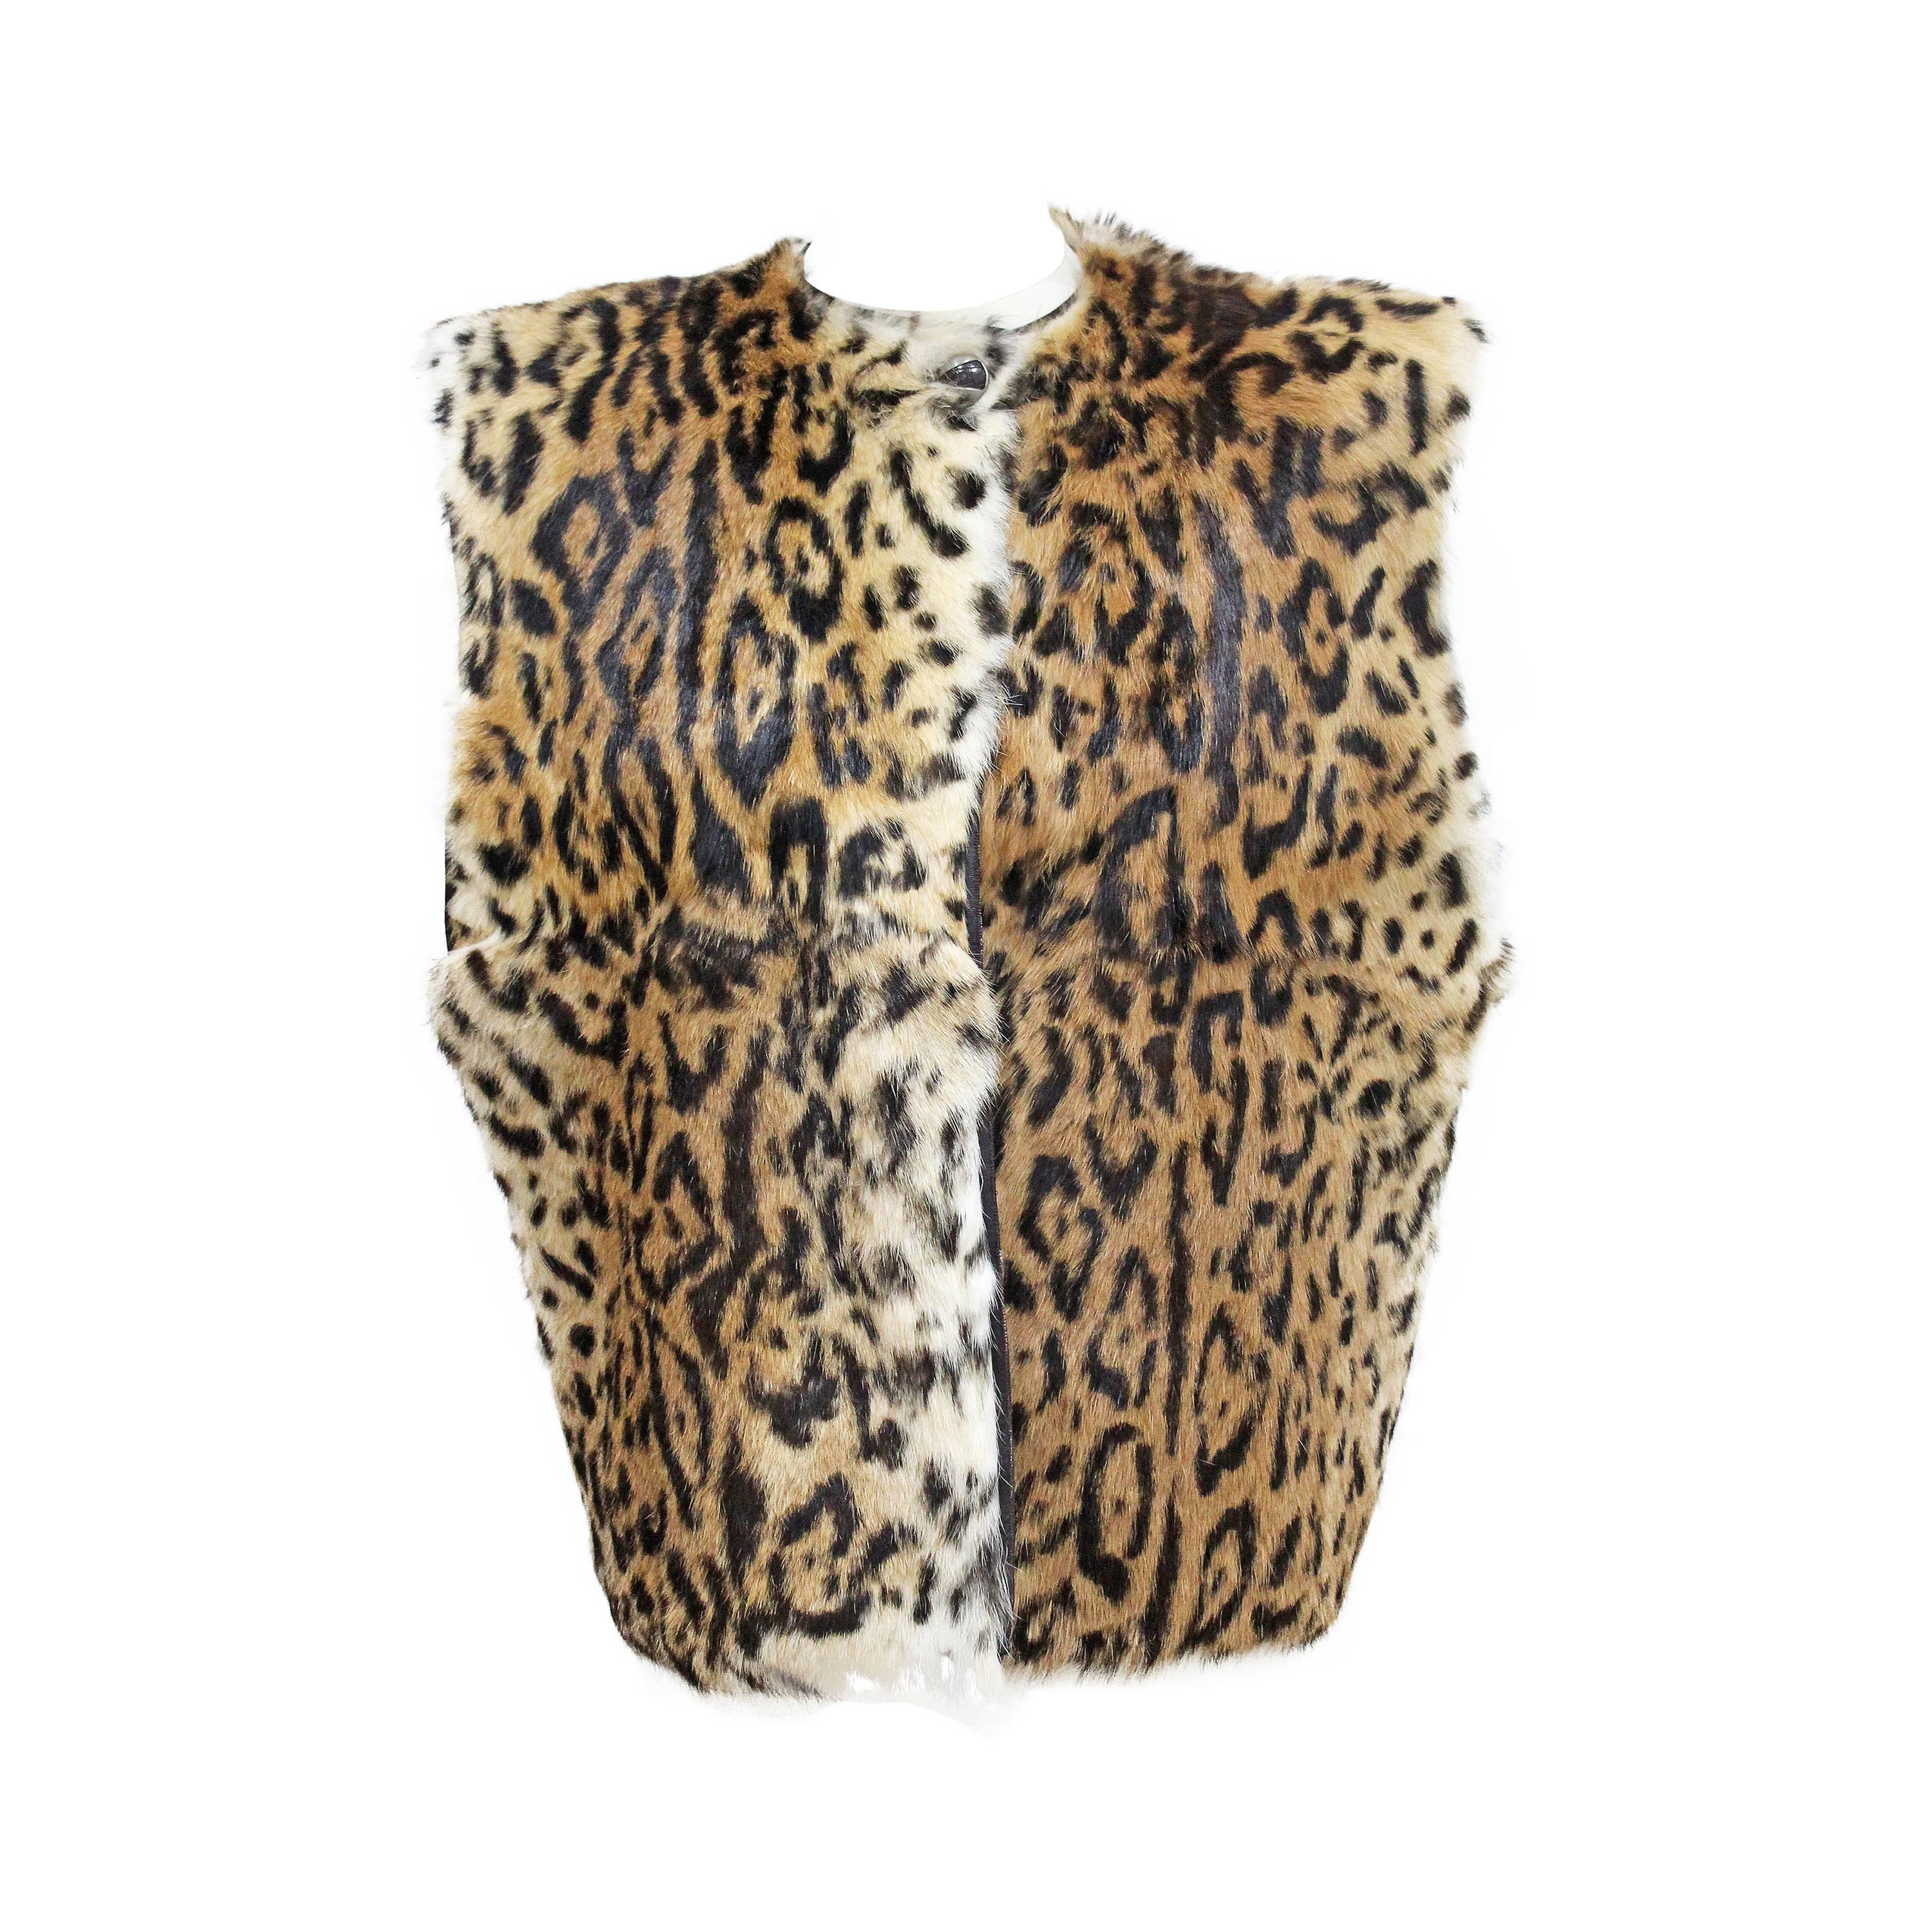 An early Gianni Versace leopard print fur gillet c. 1980s